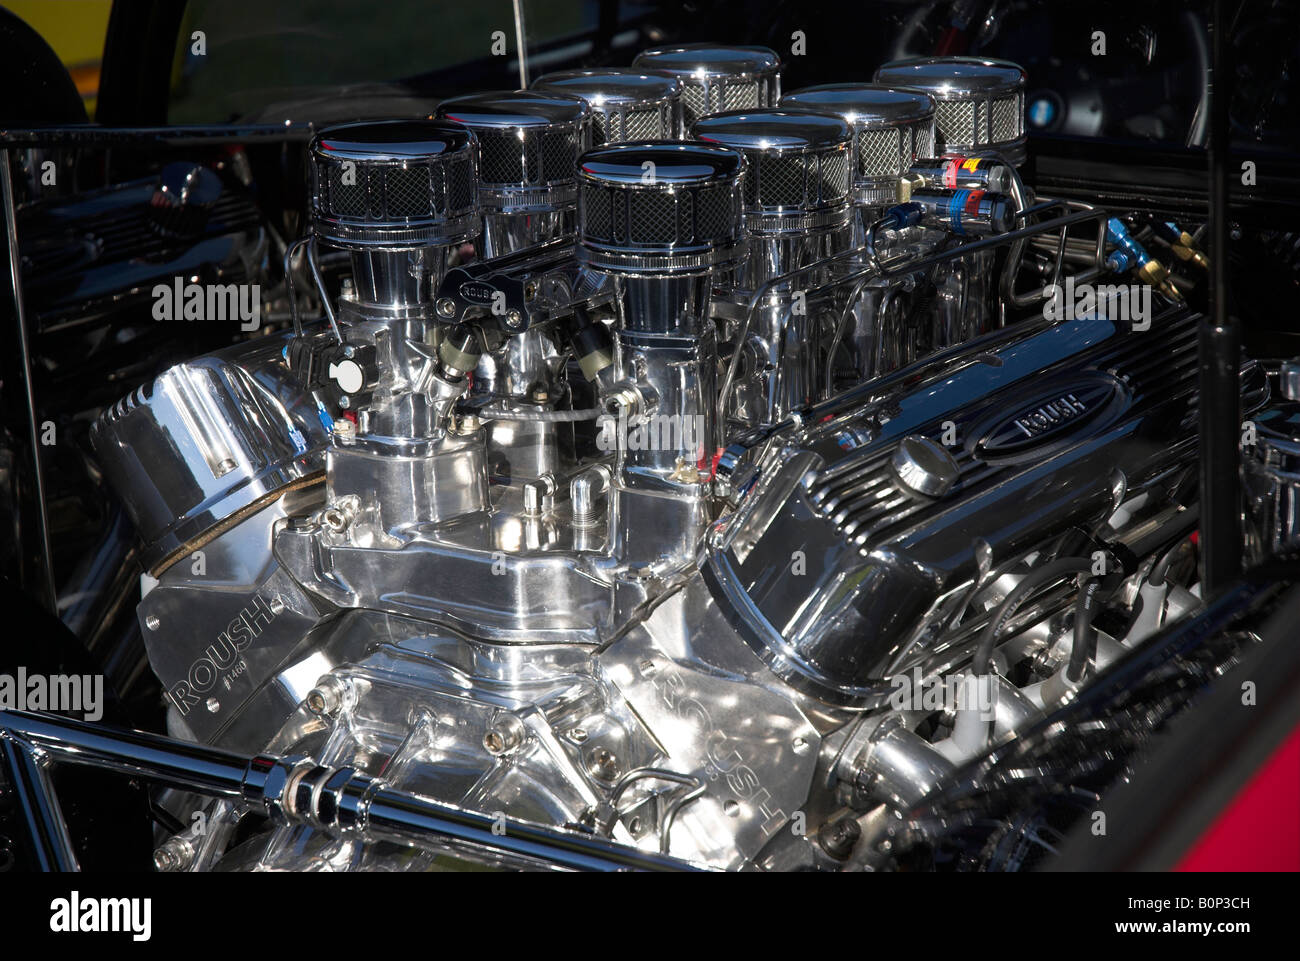 A Roush racing engine, totally polished, sitting in the engine bay of a De Tomaso Pantera at Concorso Italiano Stock Photo